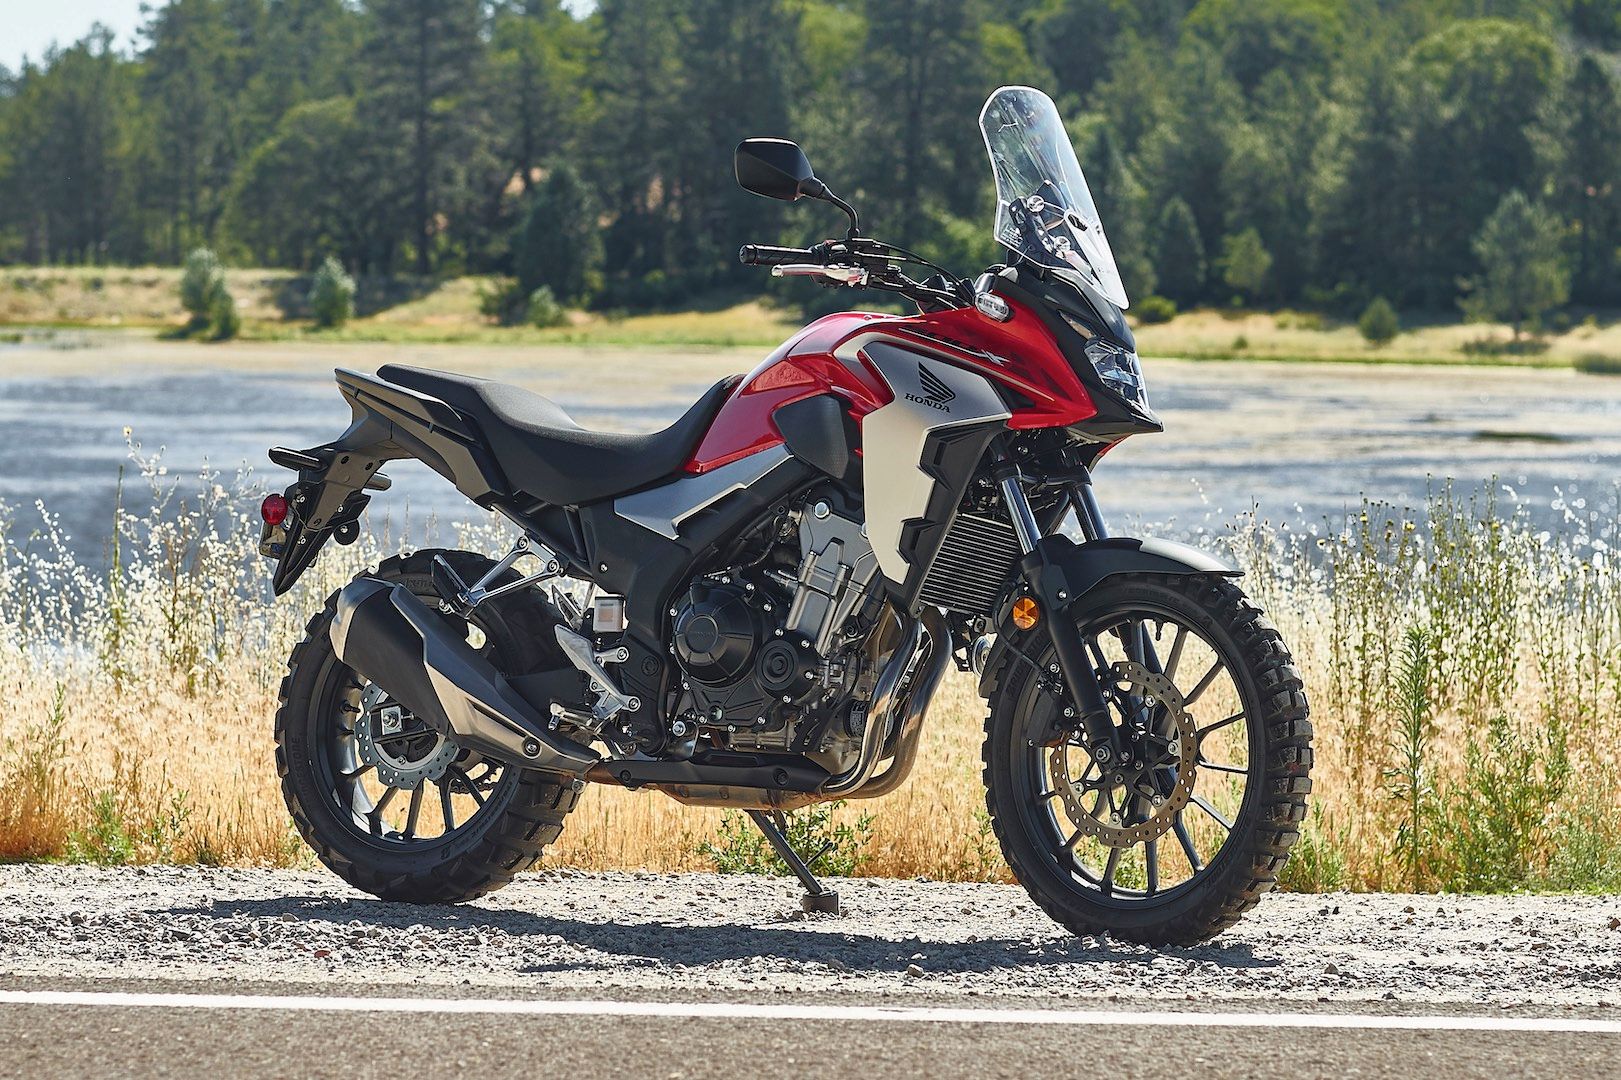 10 Things We Like About The Honda CB500X